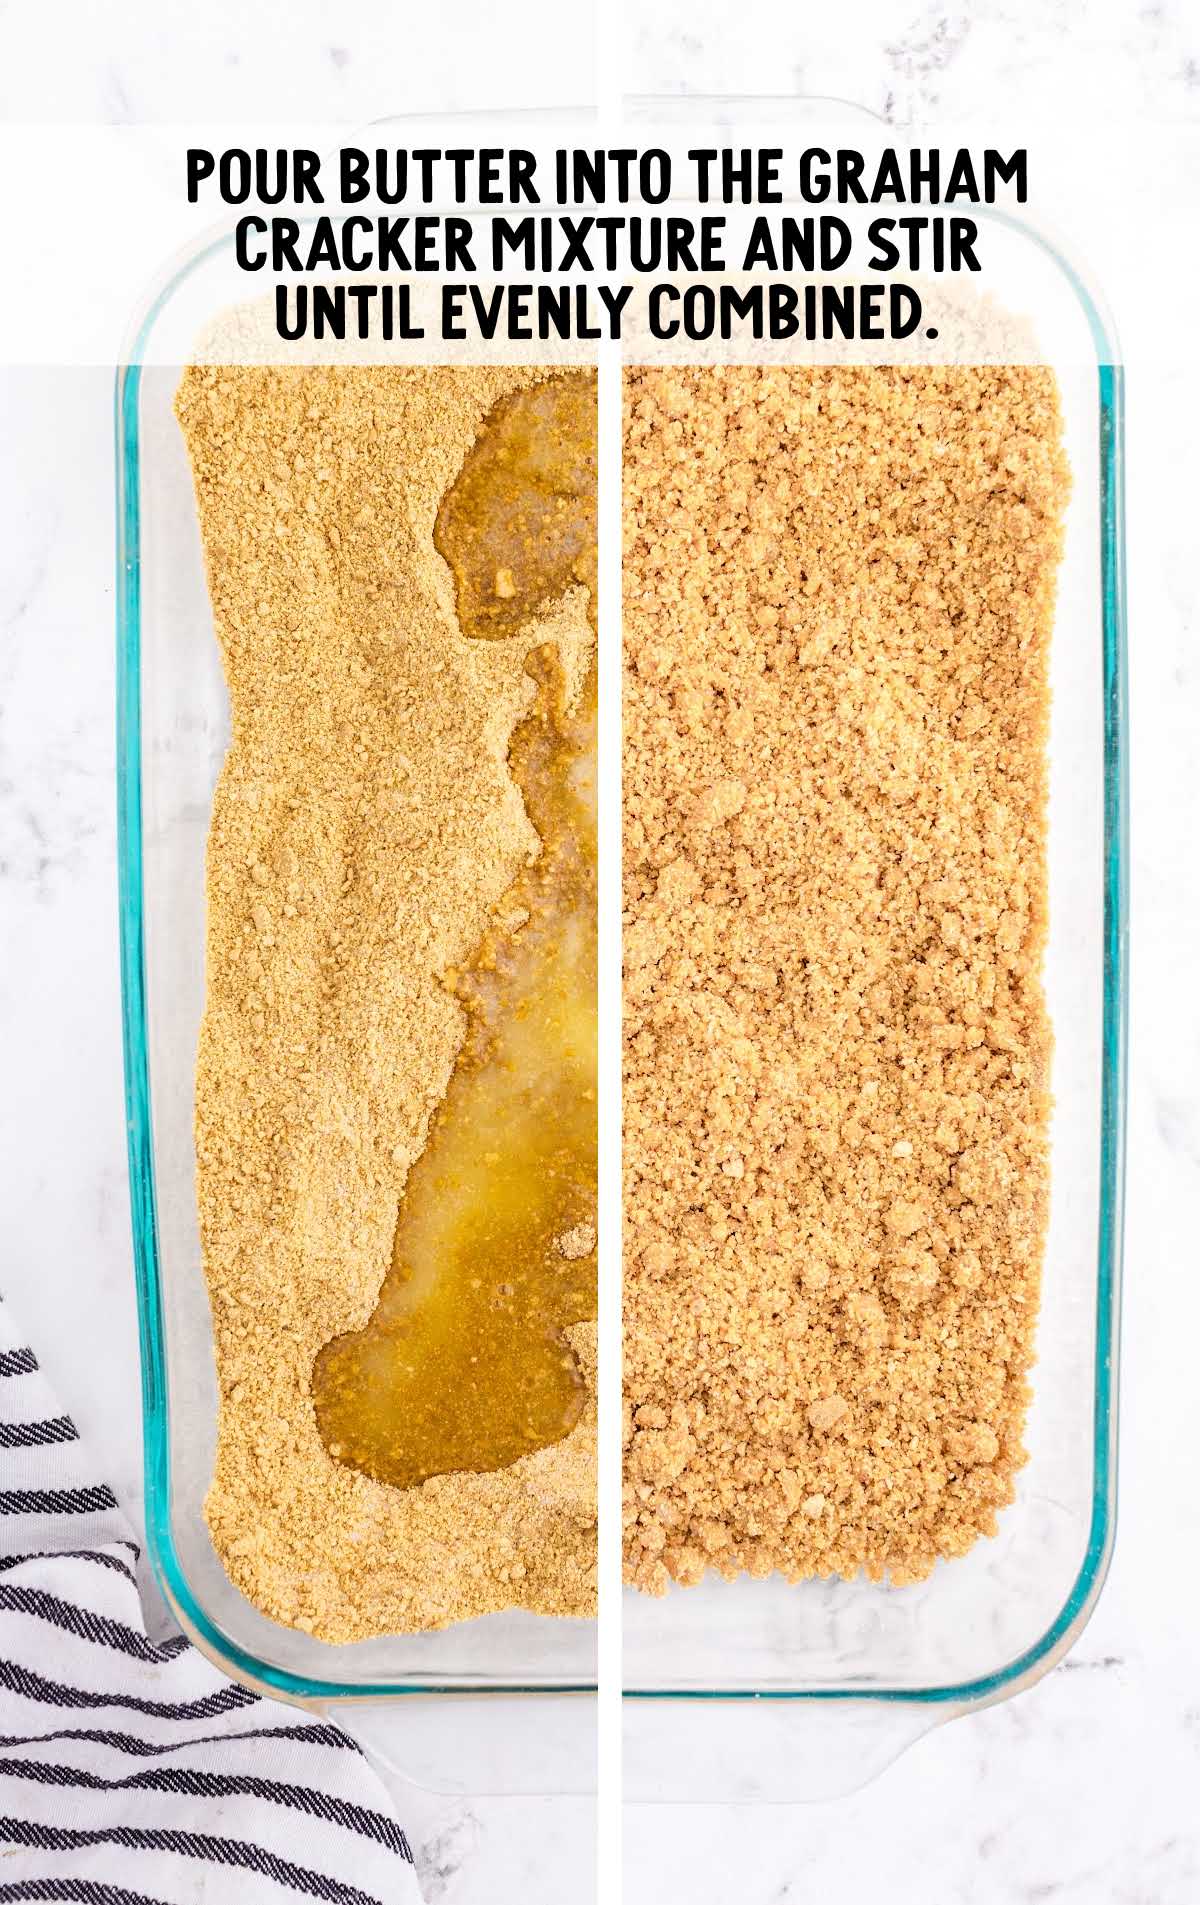 melted butter poured into the graham cracker crumbs in a baking dish